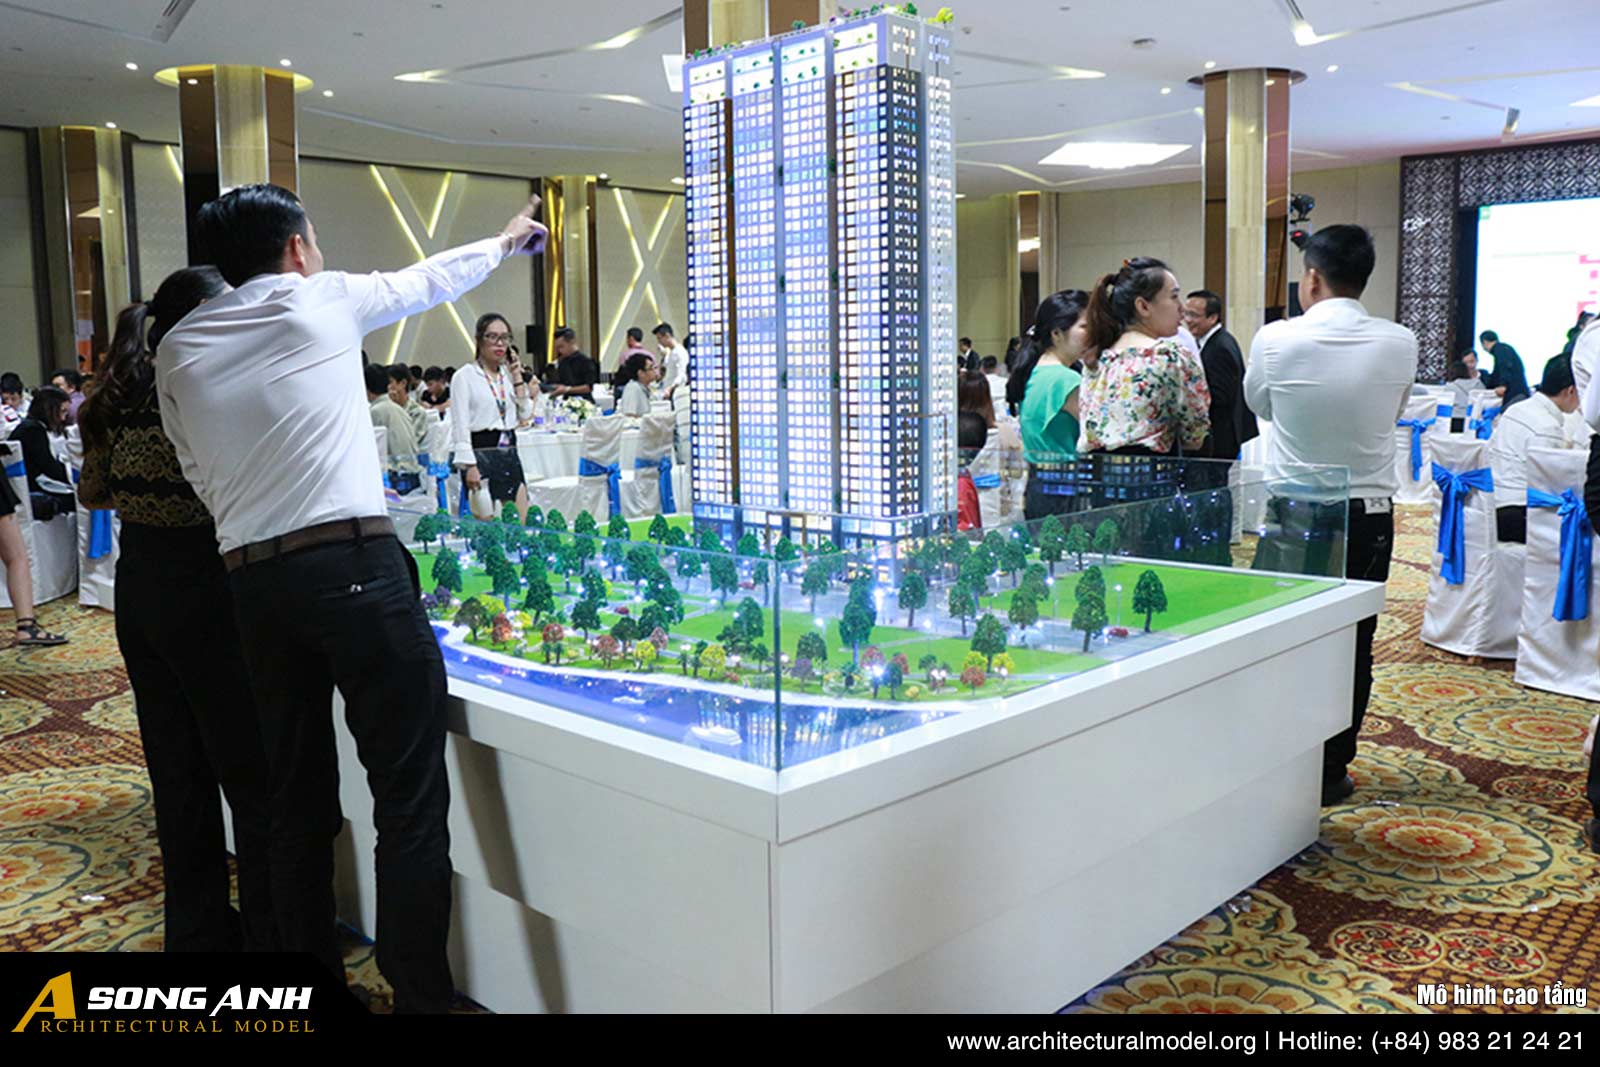 Cover image Mô hình cao tầng Architectural Model Org